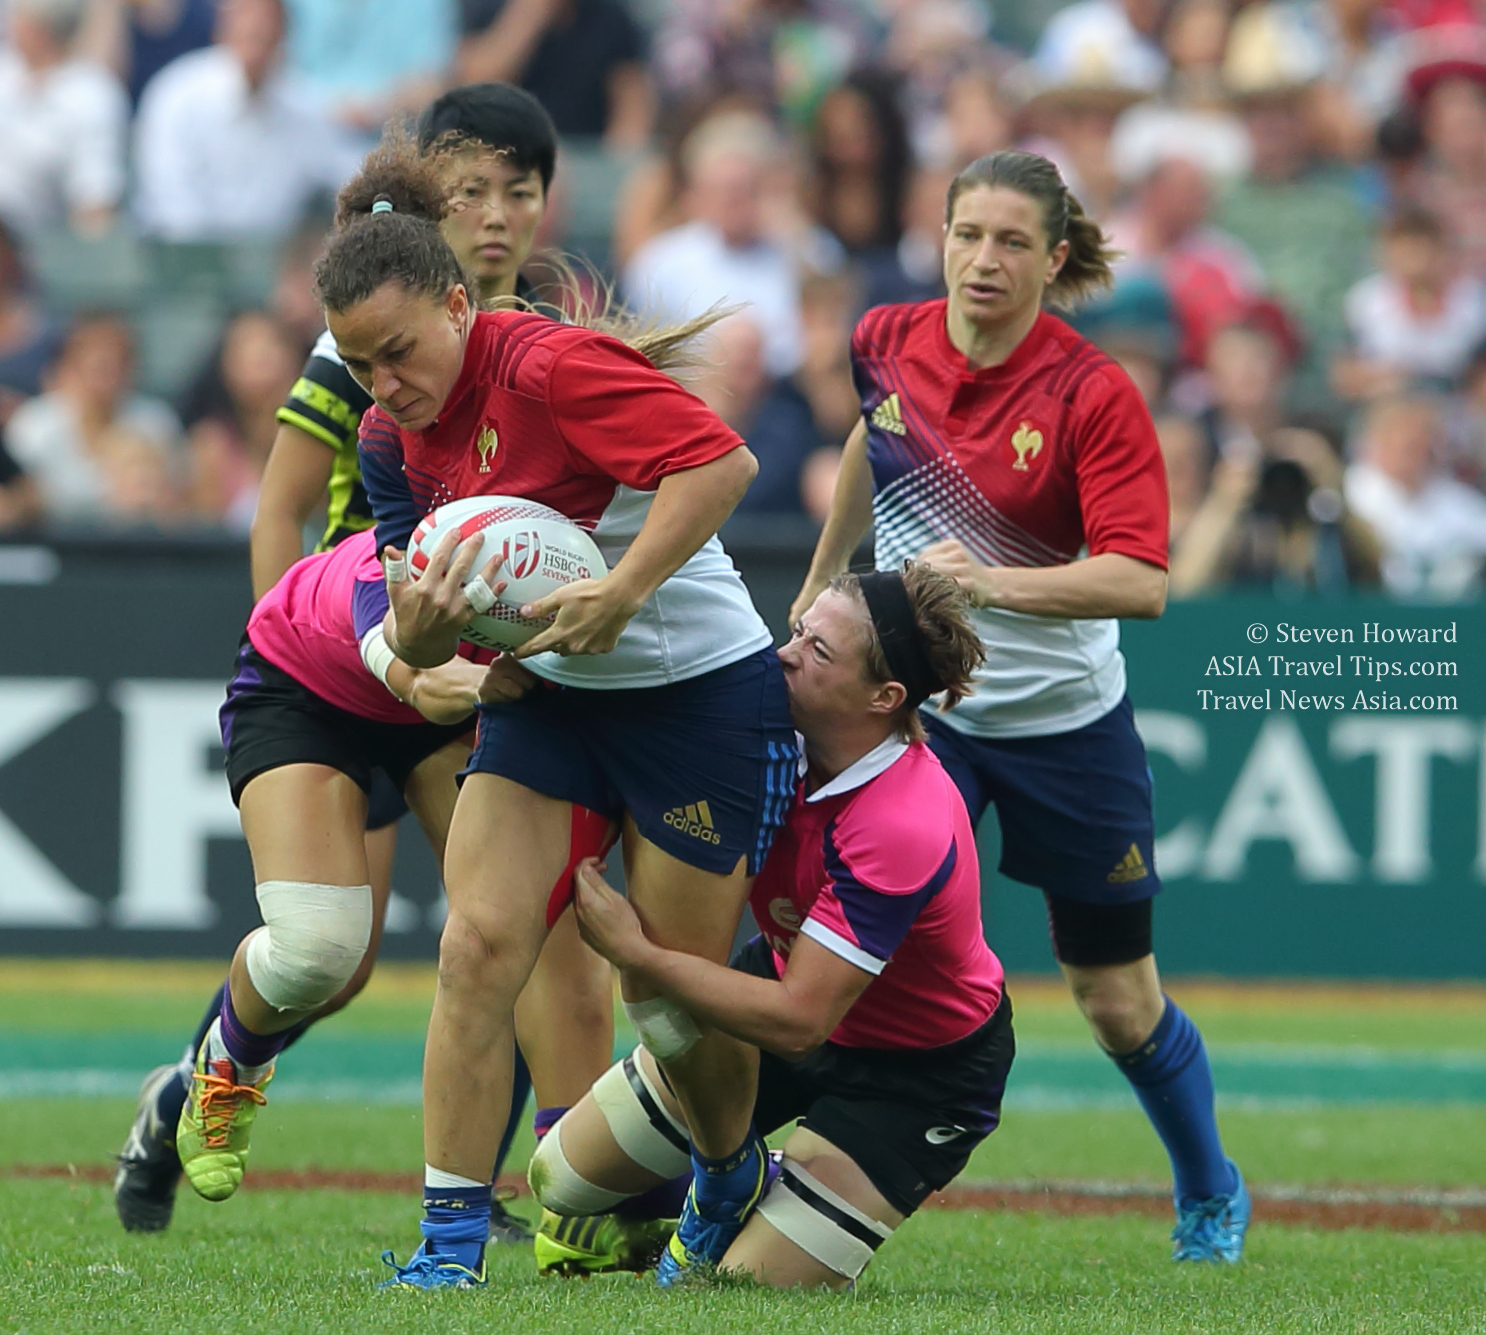 France vs South Africa action from the Cathay Pacific / HSBC Hong Kong Sevens 2016 Picture by Steven Howard of TravelNewsAsia.com Click to enlarge.